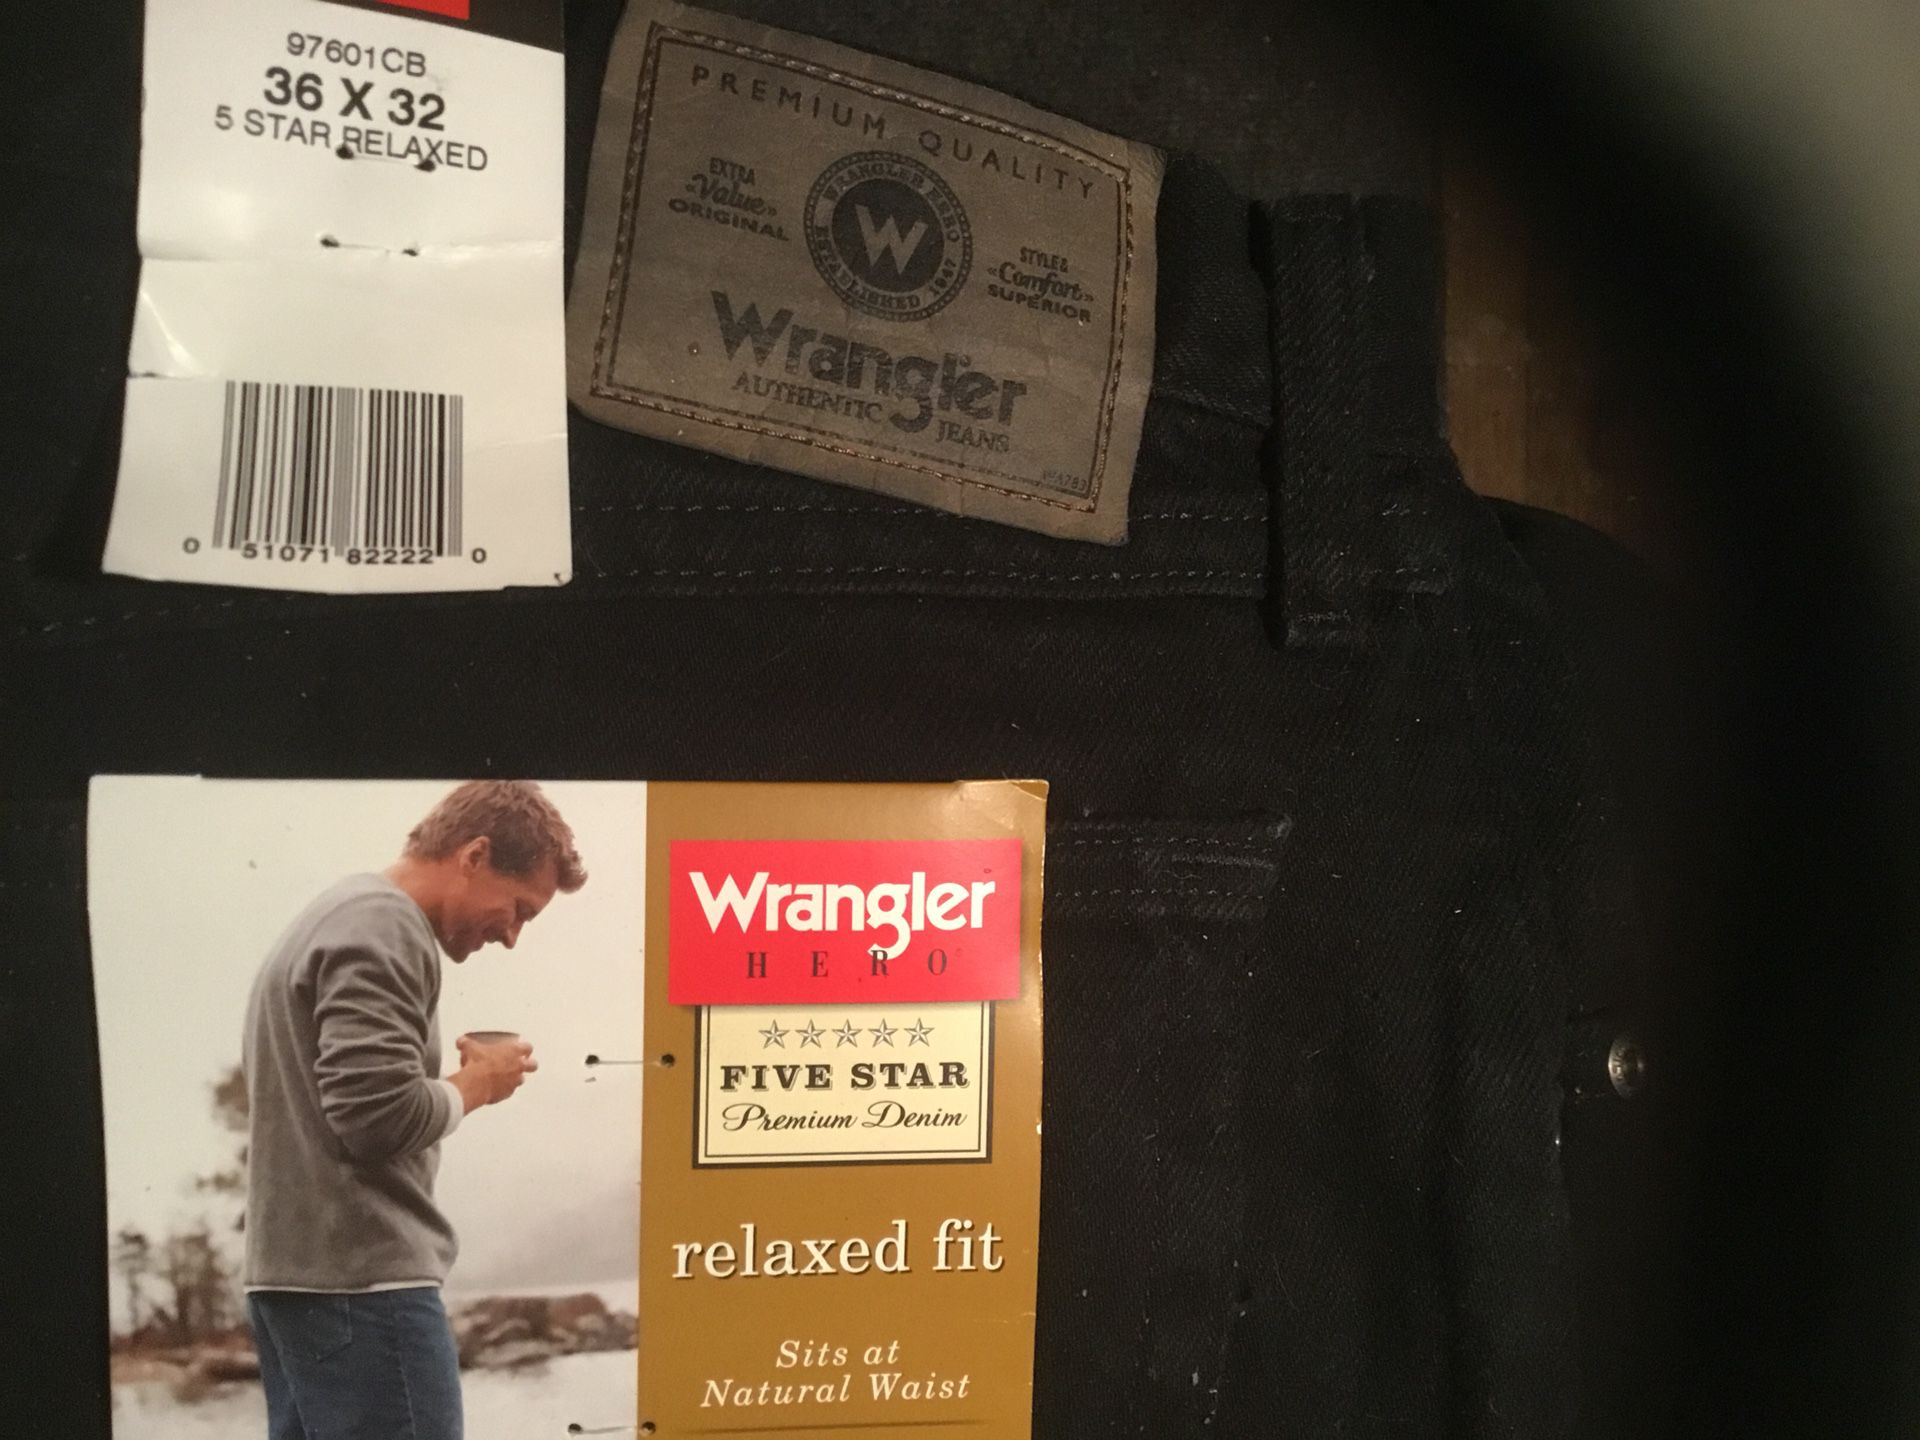 Man brand new wrangler black jeans for Sale in Derby, CT - OfferUp